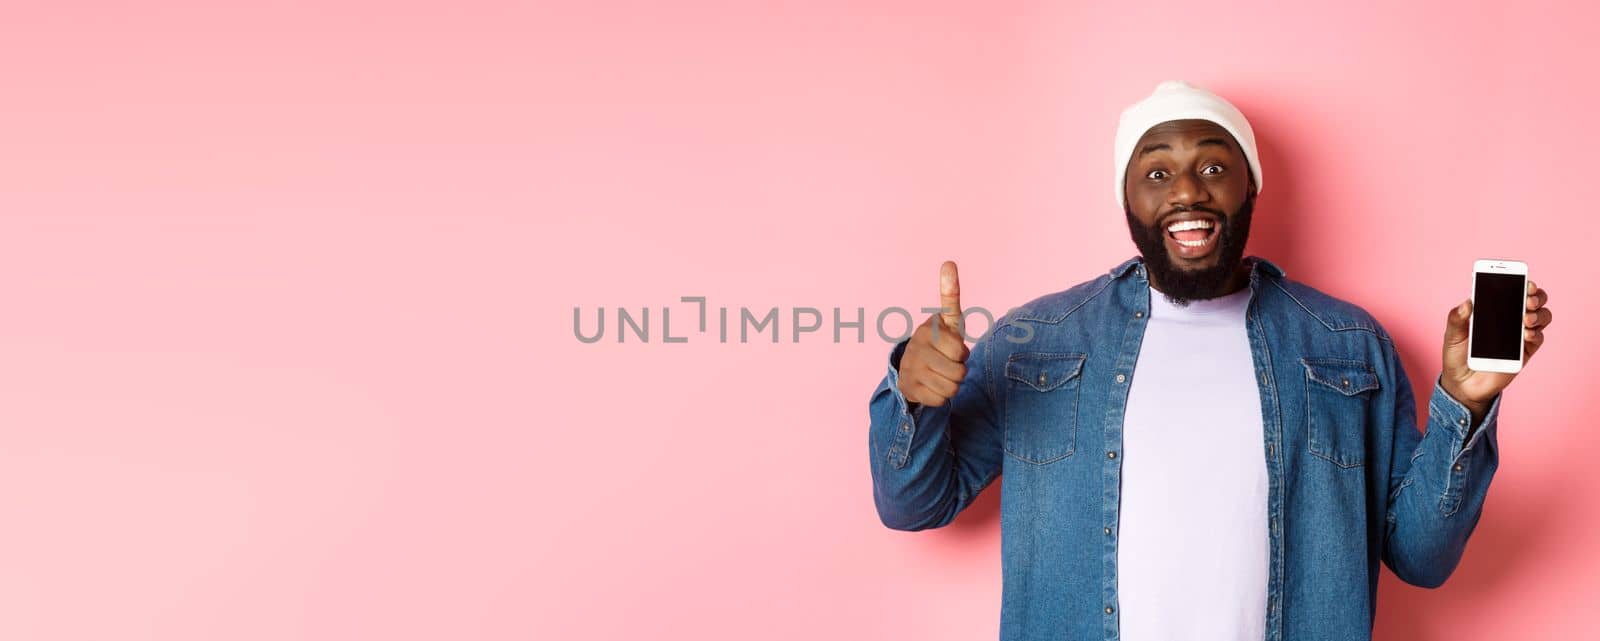 Online shopping and technology concept. Happy african-american hipster man showing thumbs-up and mobile screen, praising app, standing over pink background.